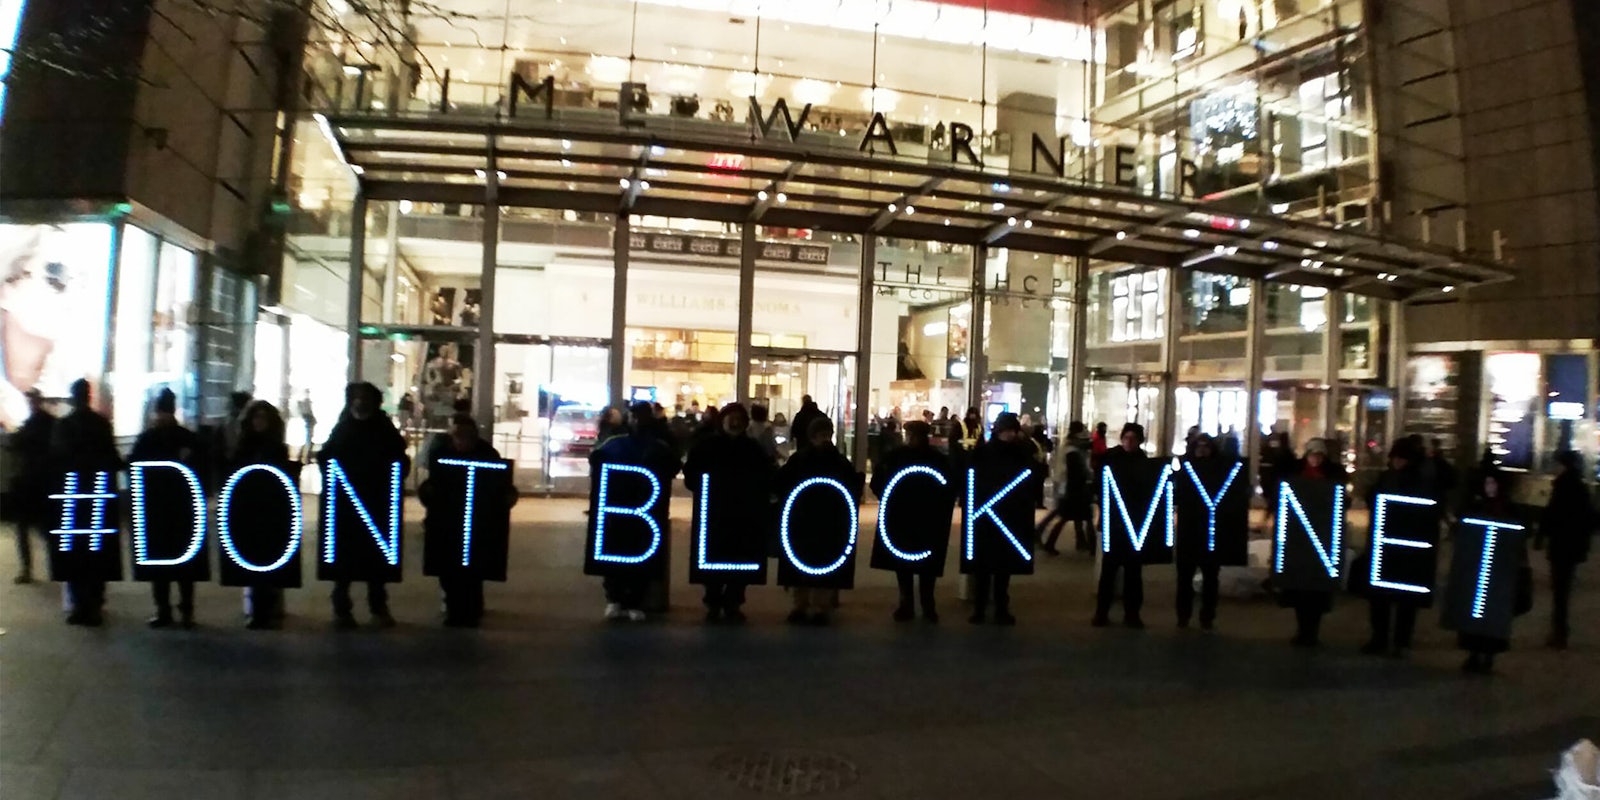 Protesters holding 'Don't Block My Net' lighted signs in front of Time Warner Cable building